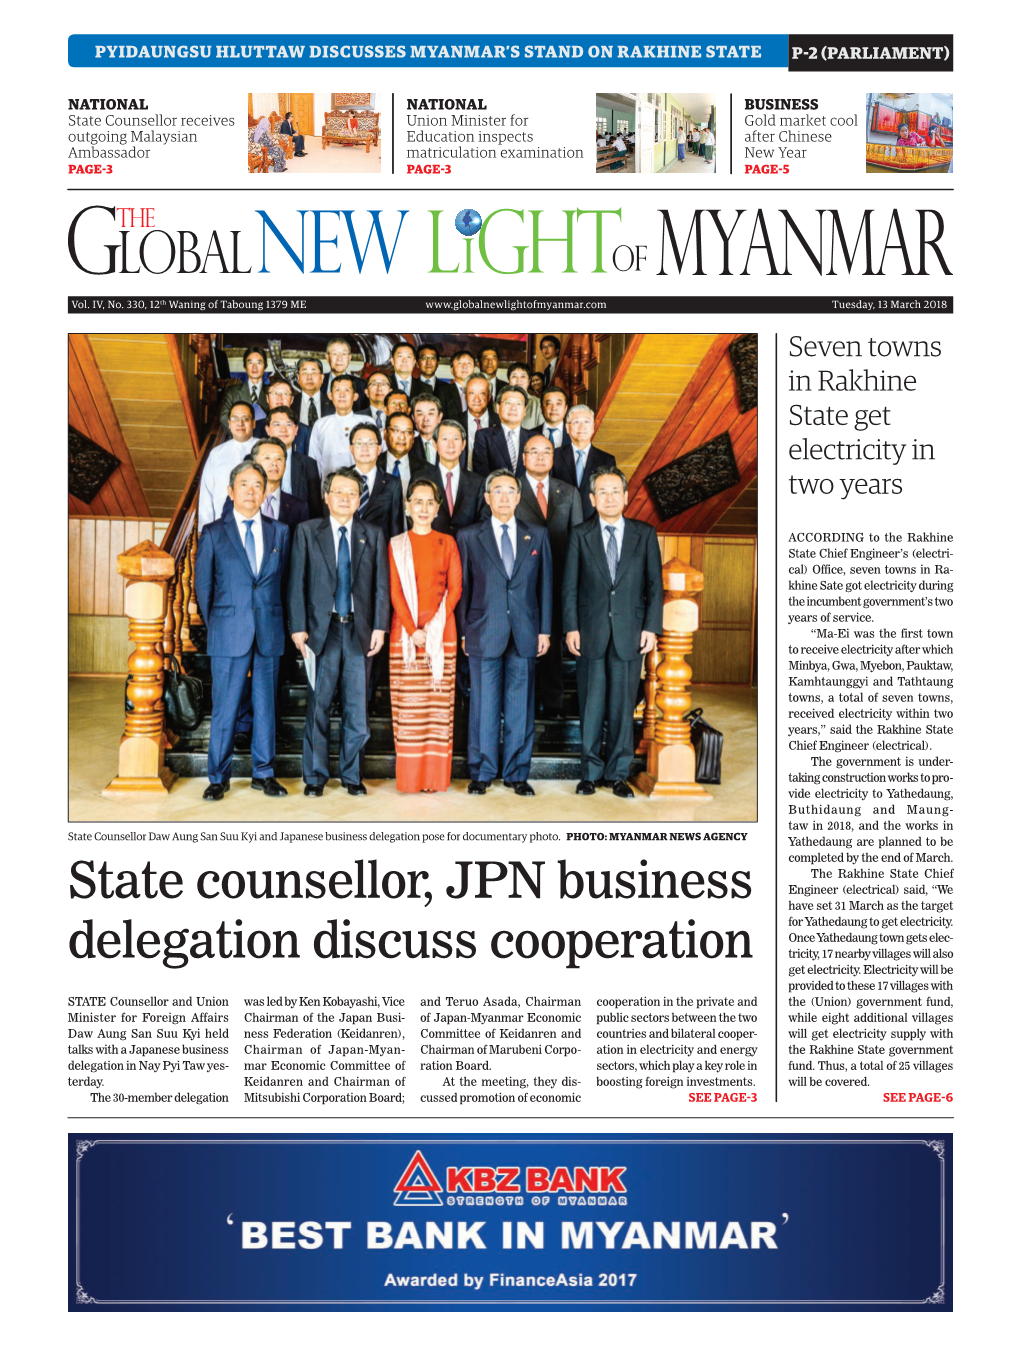 State Counsellor, JPN Business Delegation Discuss Cooperation